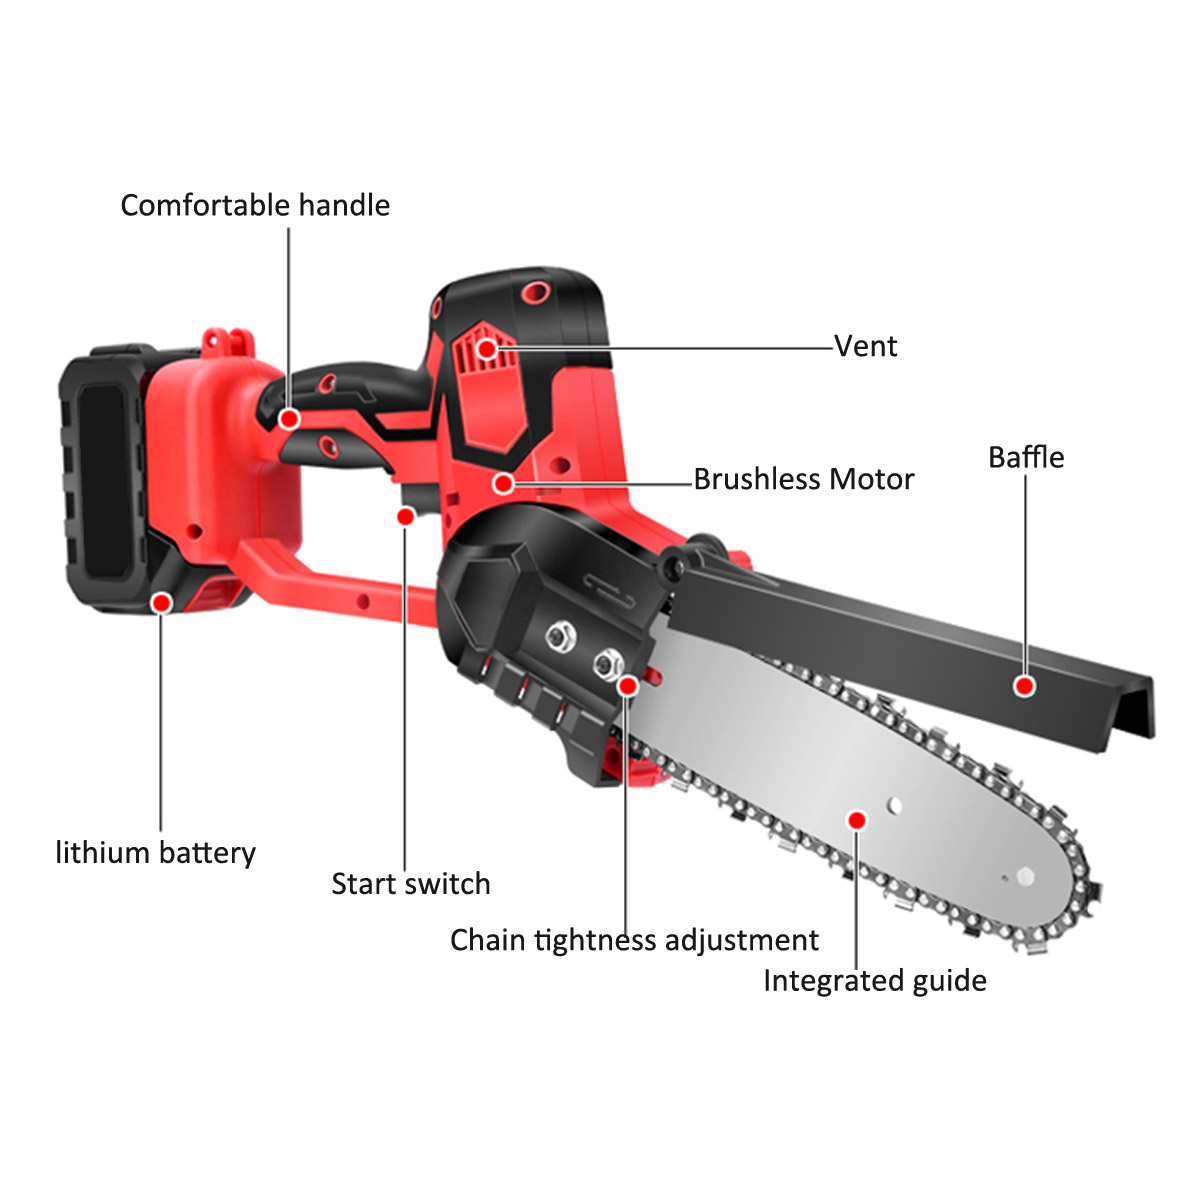 1080W-8-Inch-Electric-Cordless-Chainsaw-Chain-Saw-Handheld-Garden-Wood-Cutting-Tool-W-None1pc-Batter-1829229-9